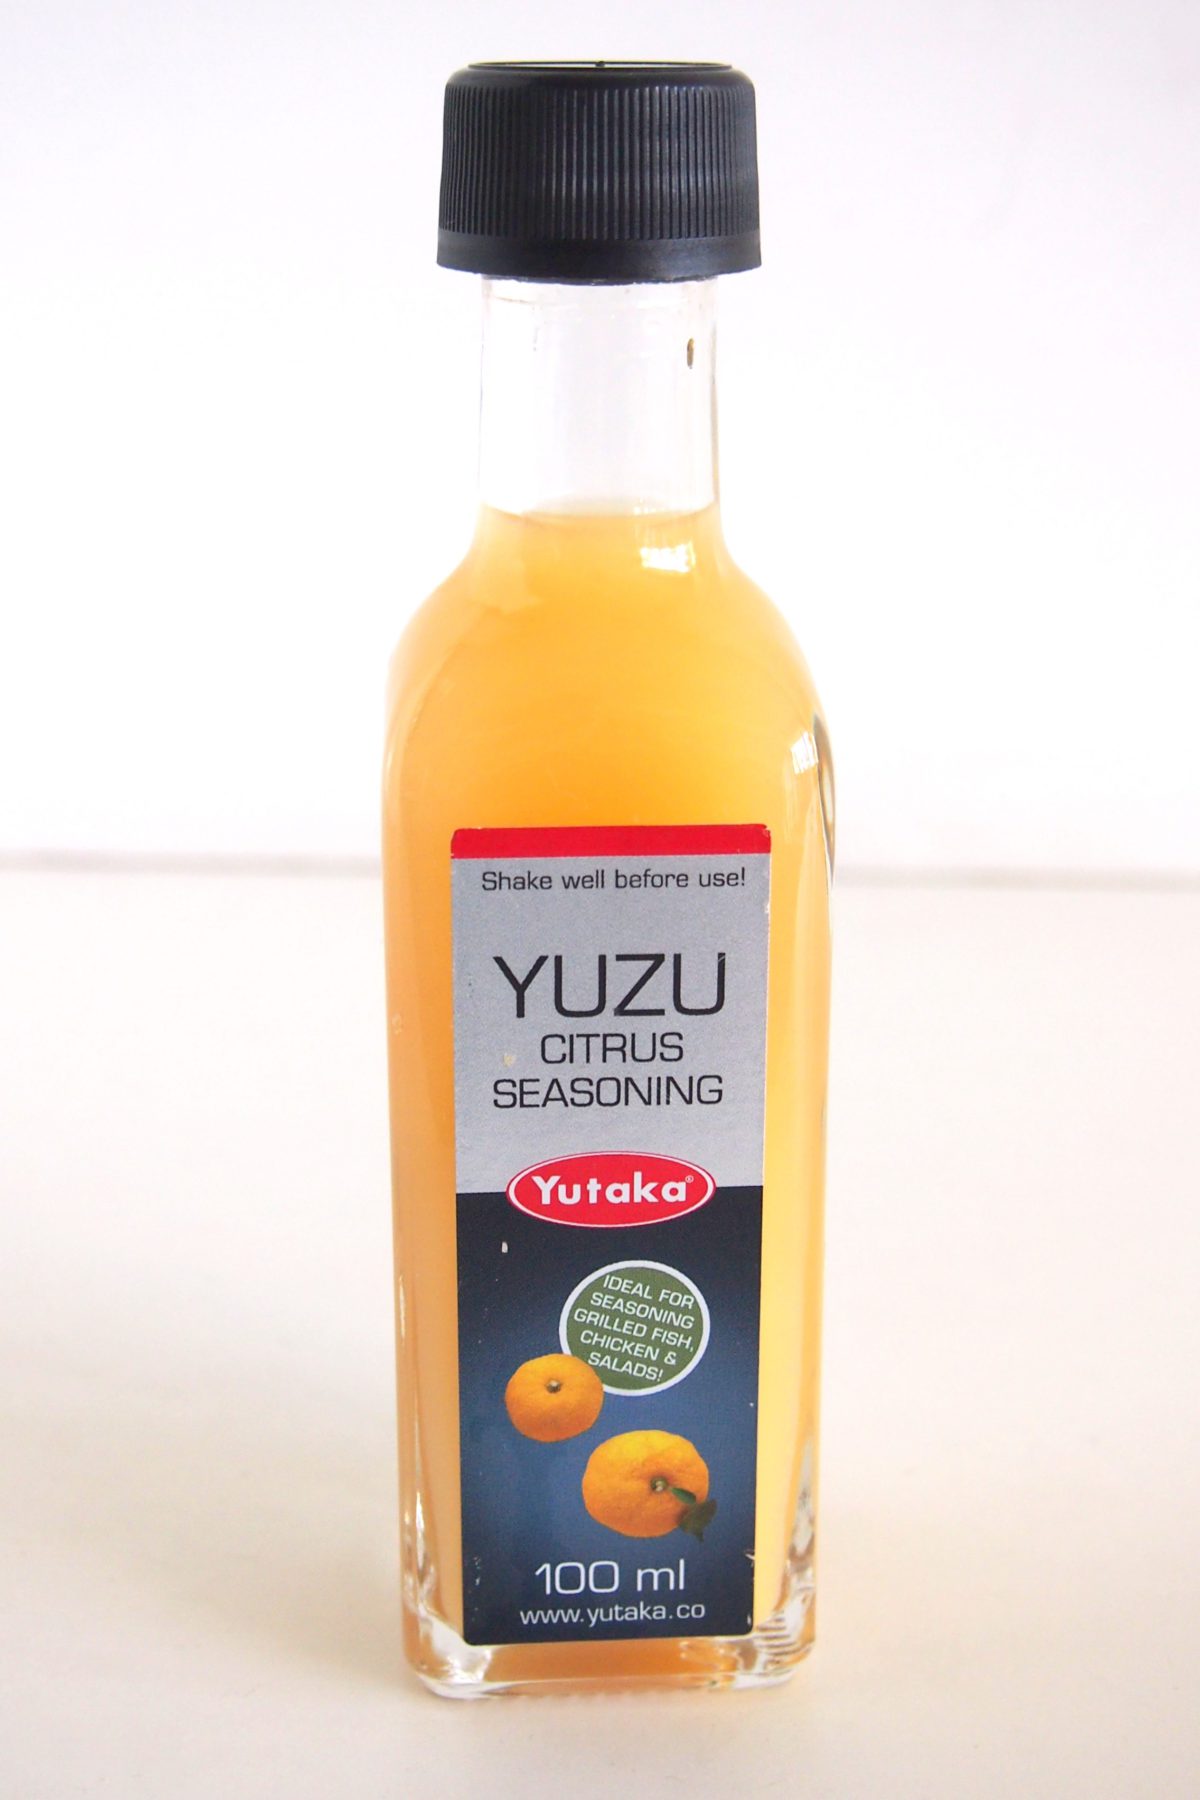 All you need to know about yuzu, the ‘new’ trendy food